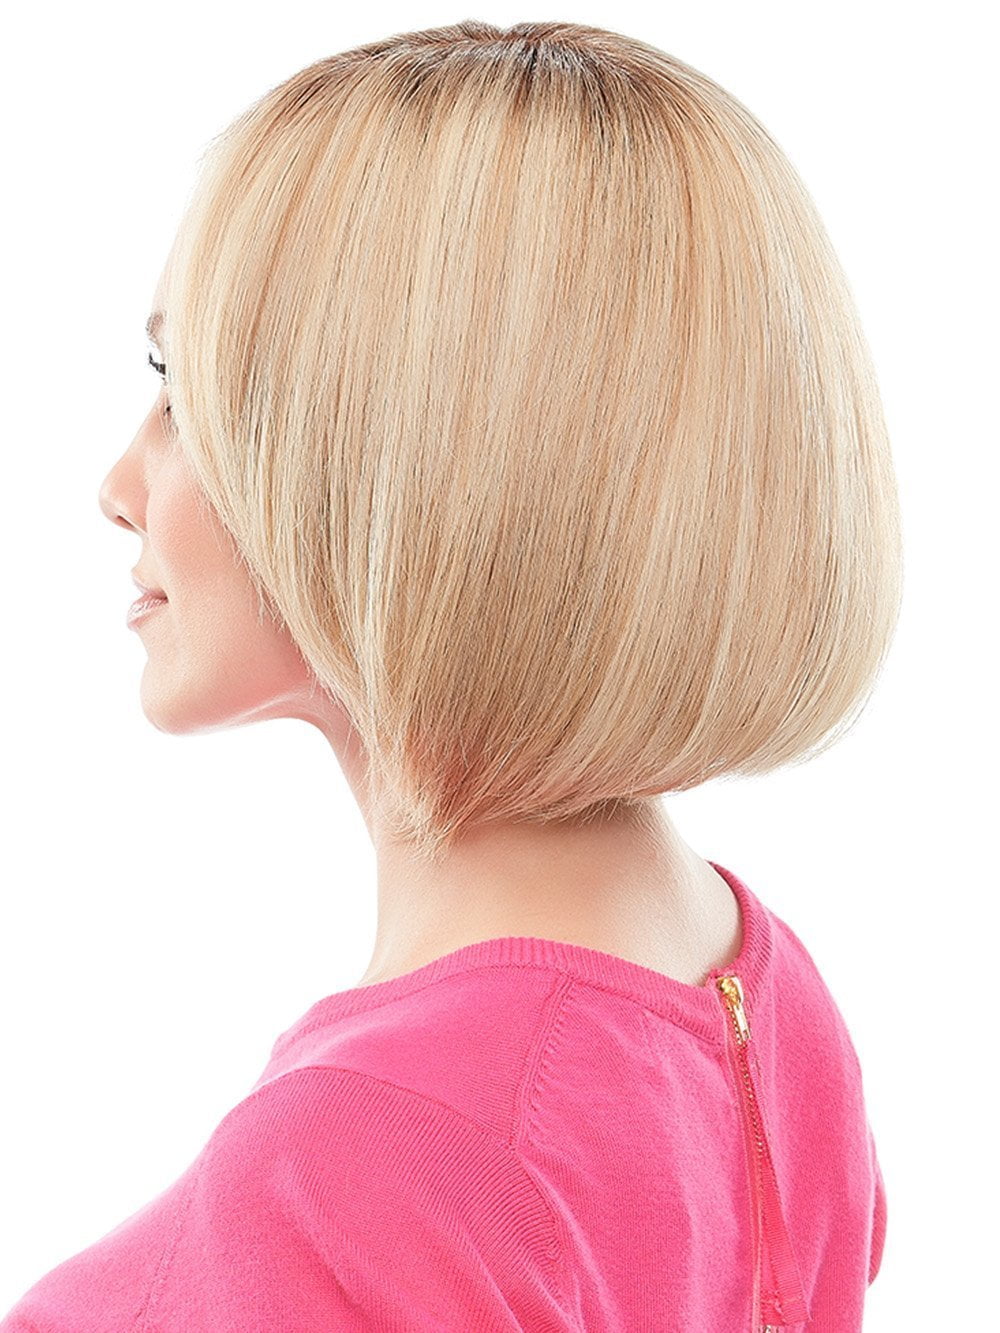 The top quality Remy human hair can be styled to blend seamlessly with short natural hair.